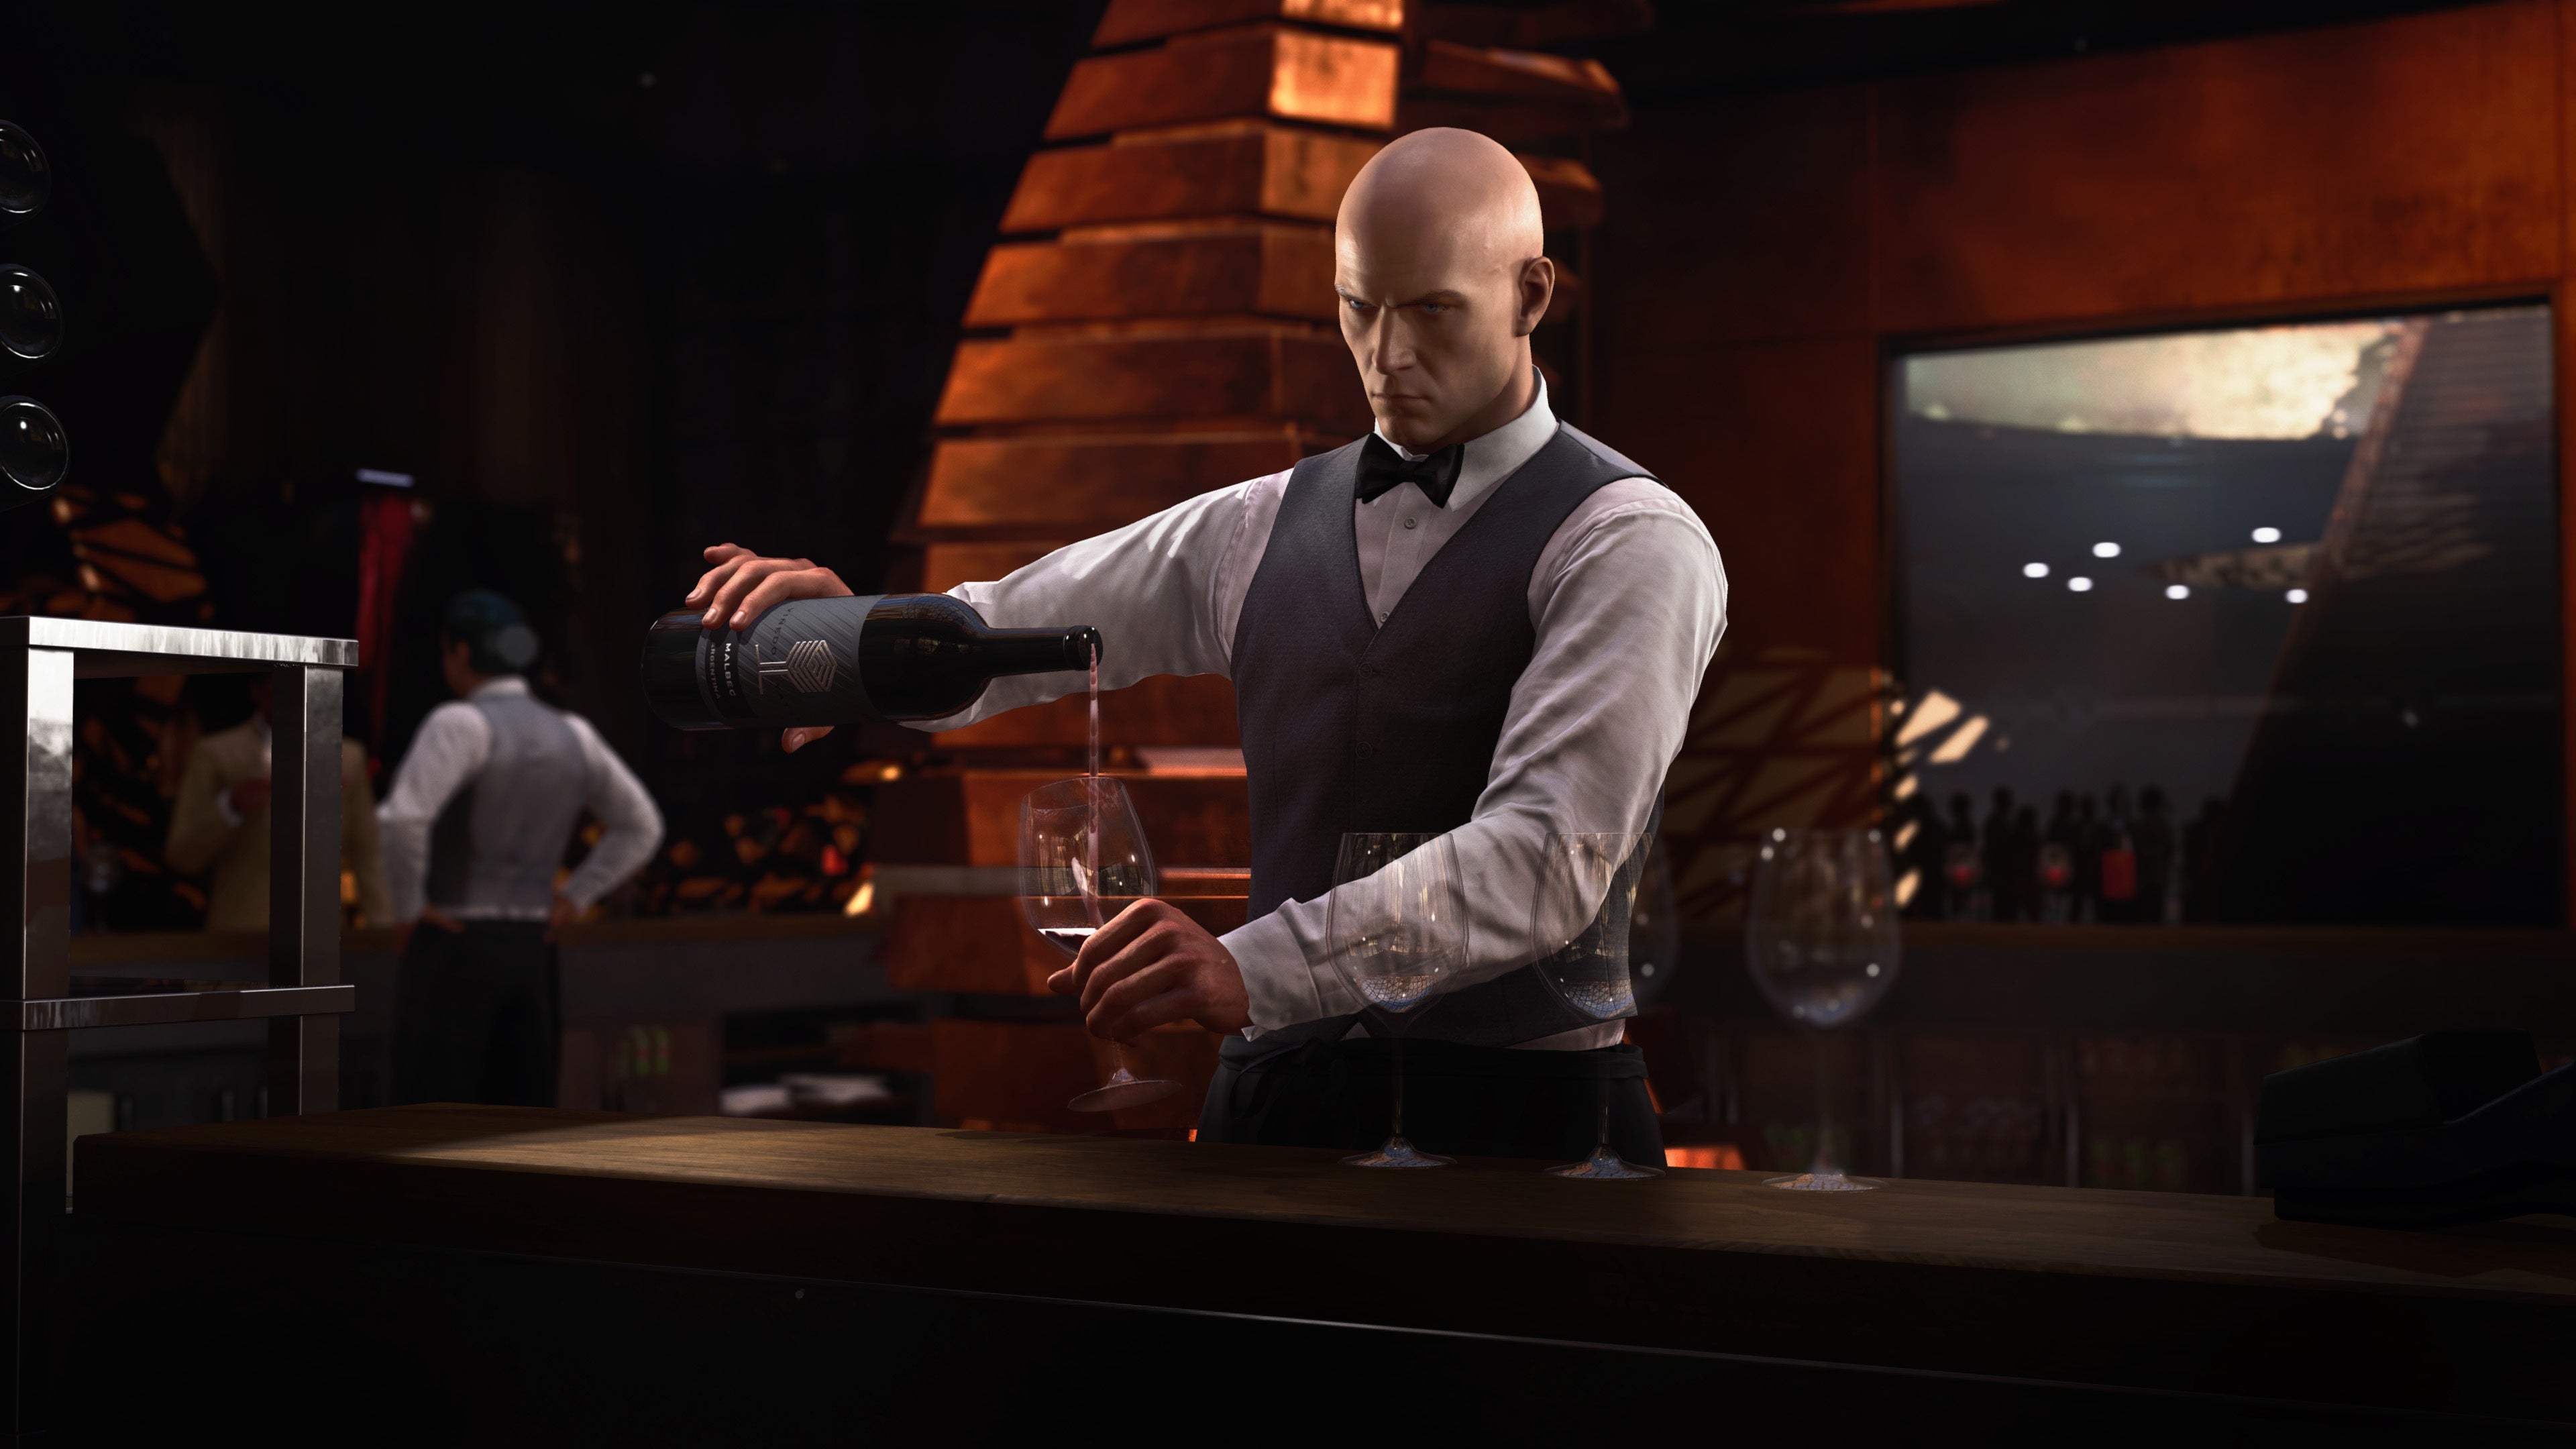 Agent 47 pretends to serve a drink in Hitman 3